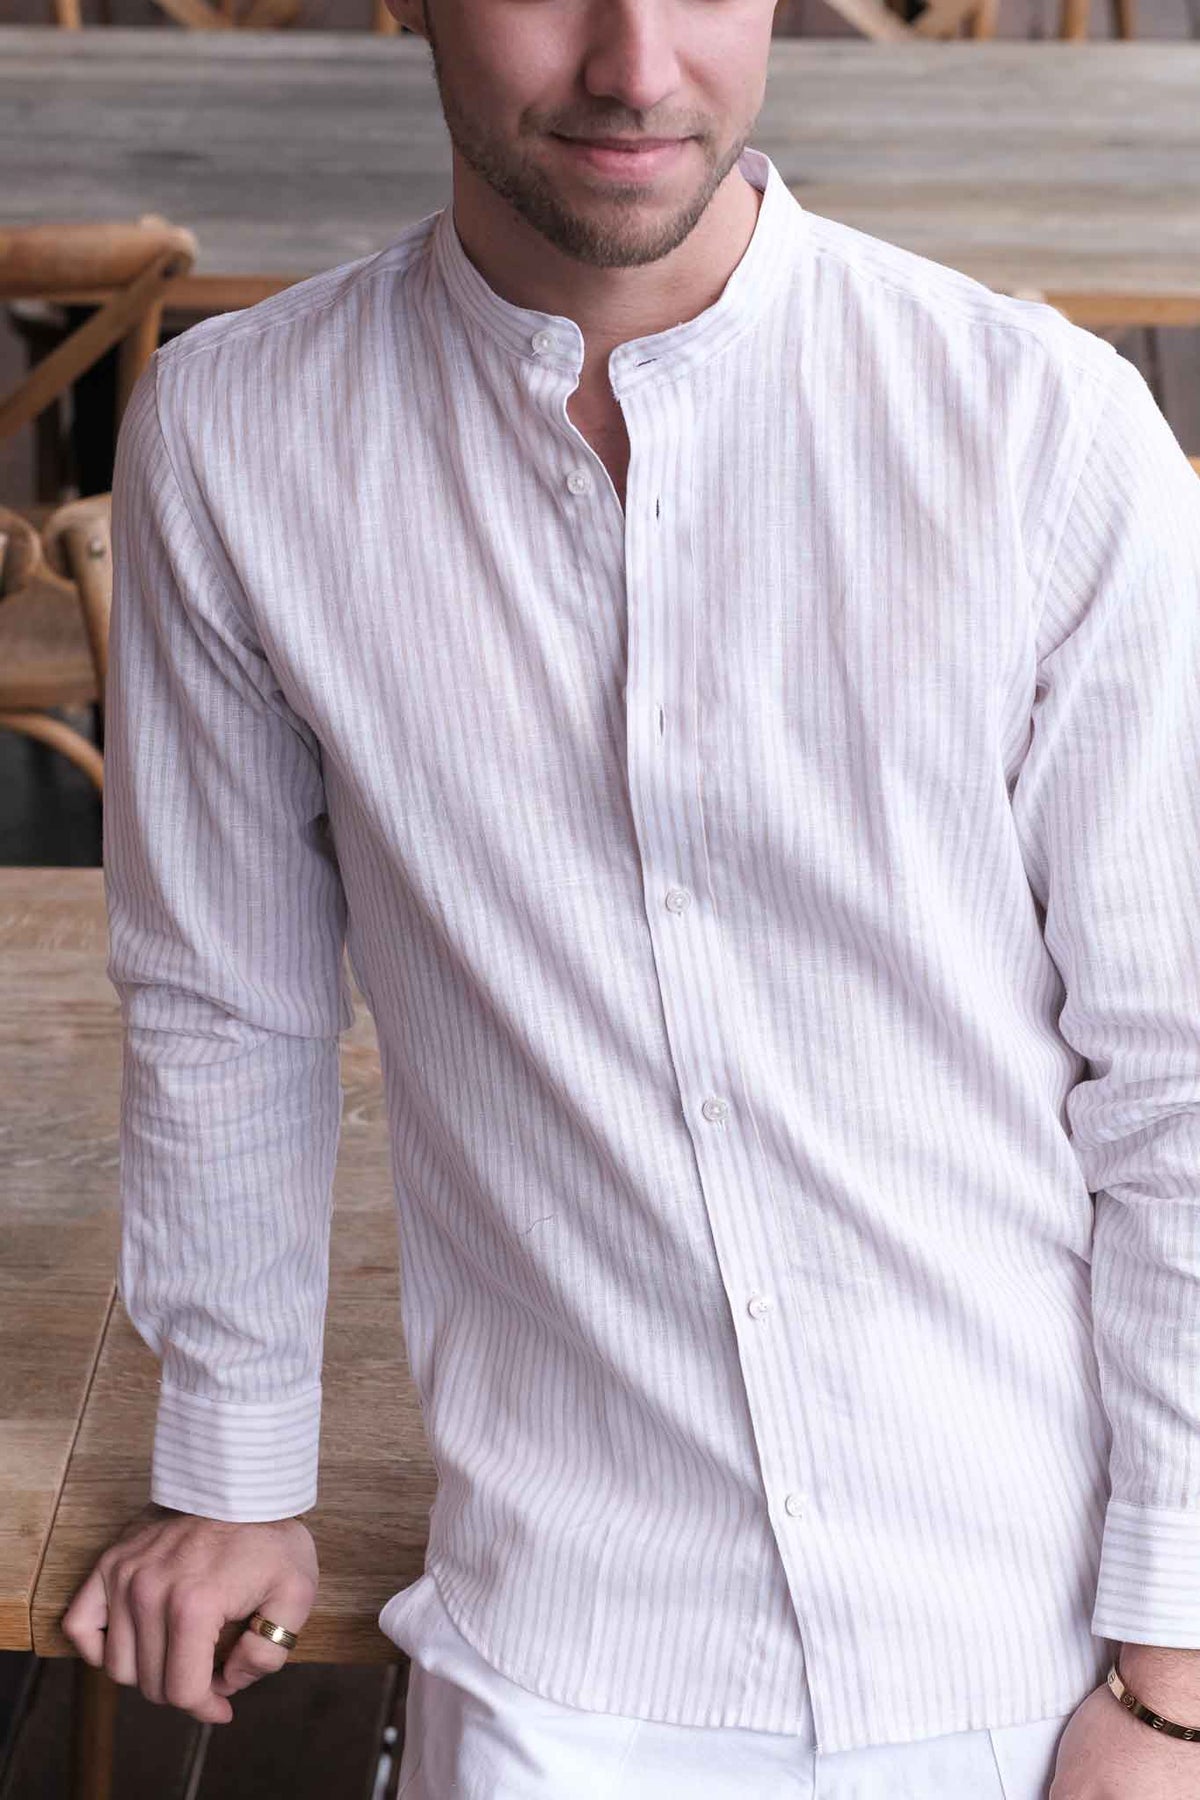 Linen shirt with stripes in beige and stand-up collar (Art. 2261-C-SK)